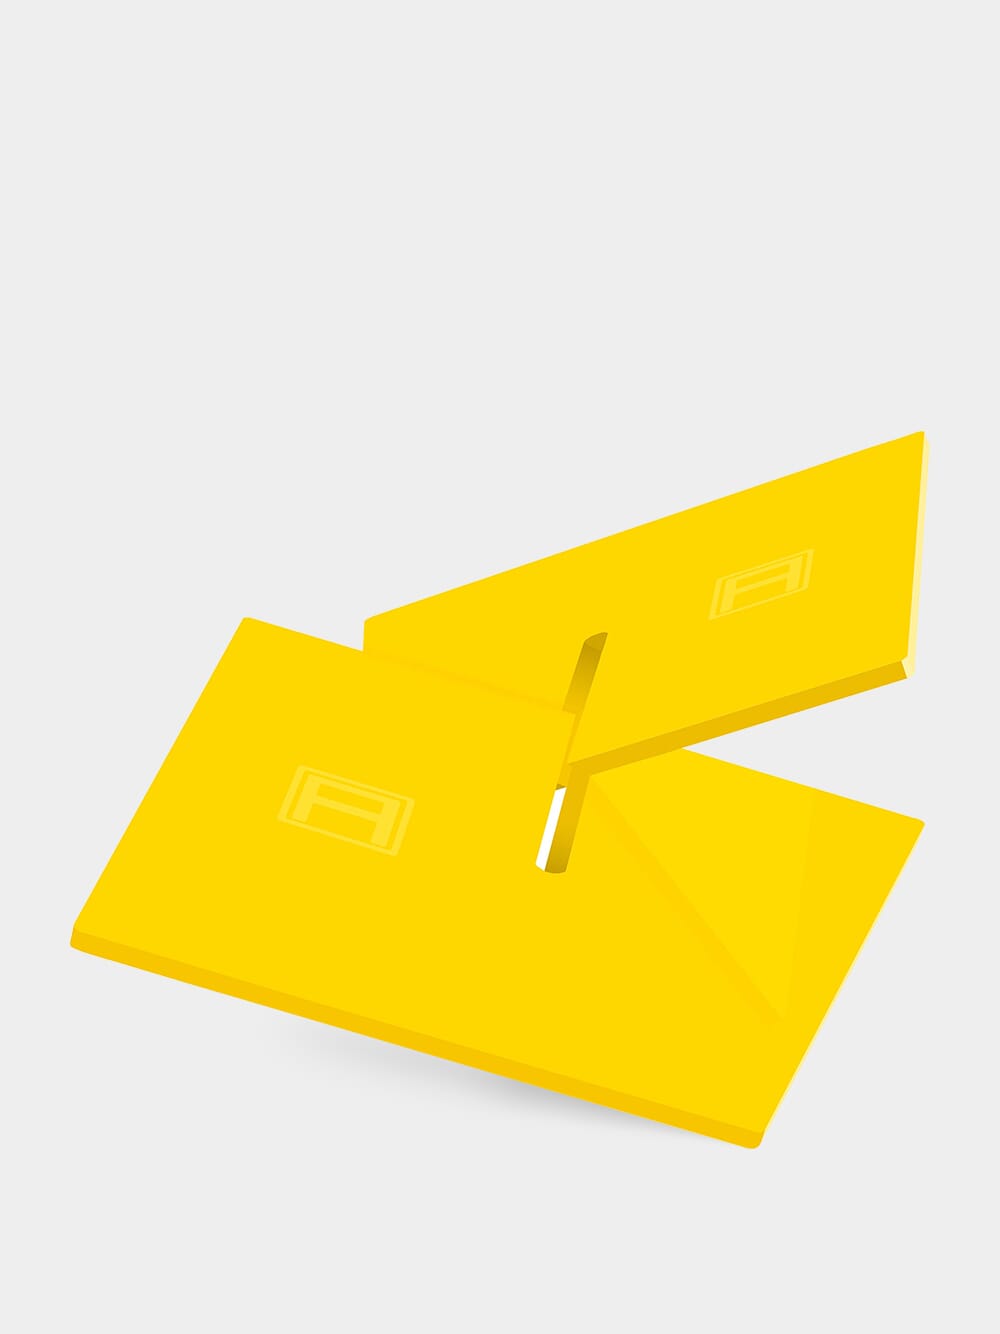 Solid Yellow Bookstand